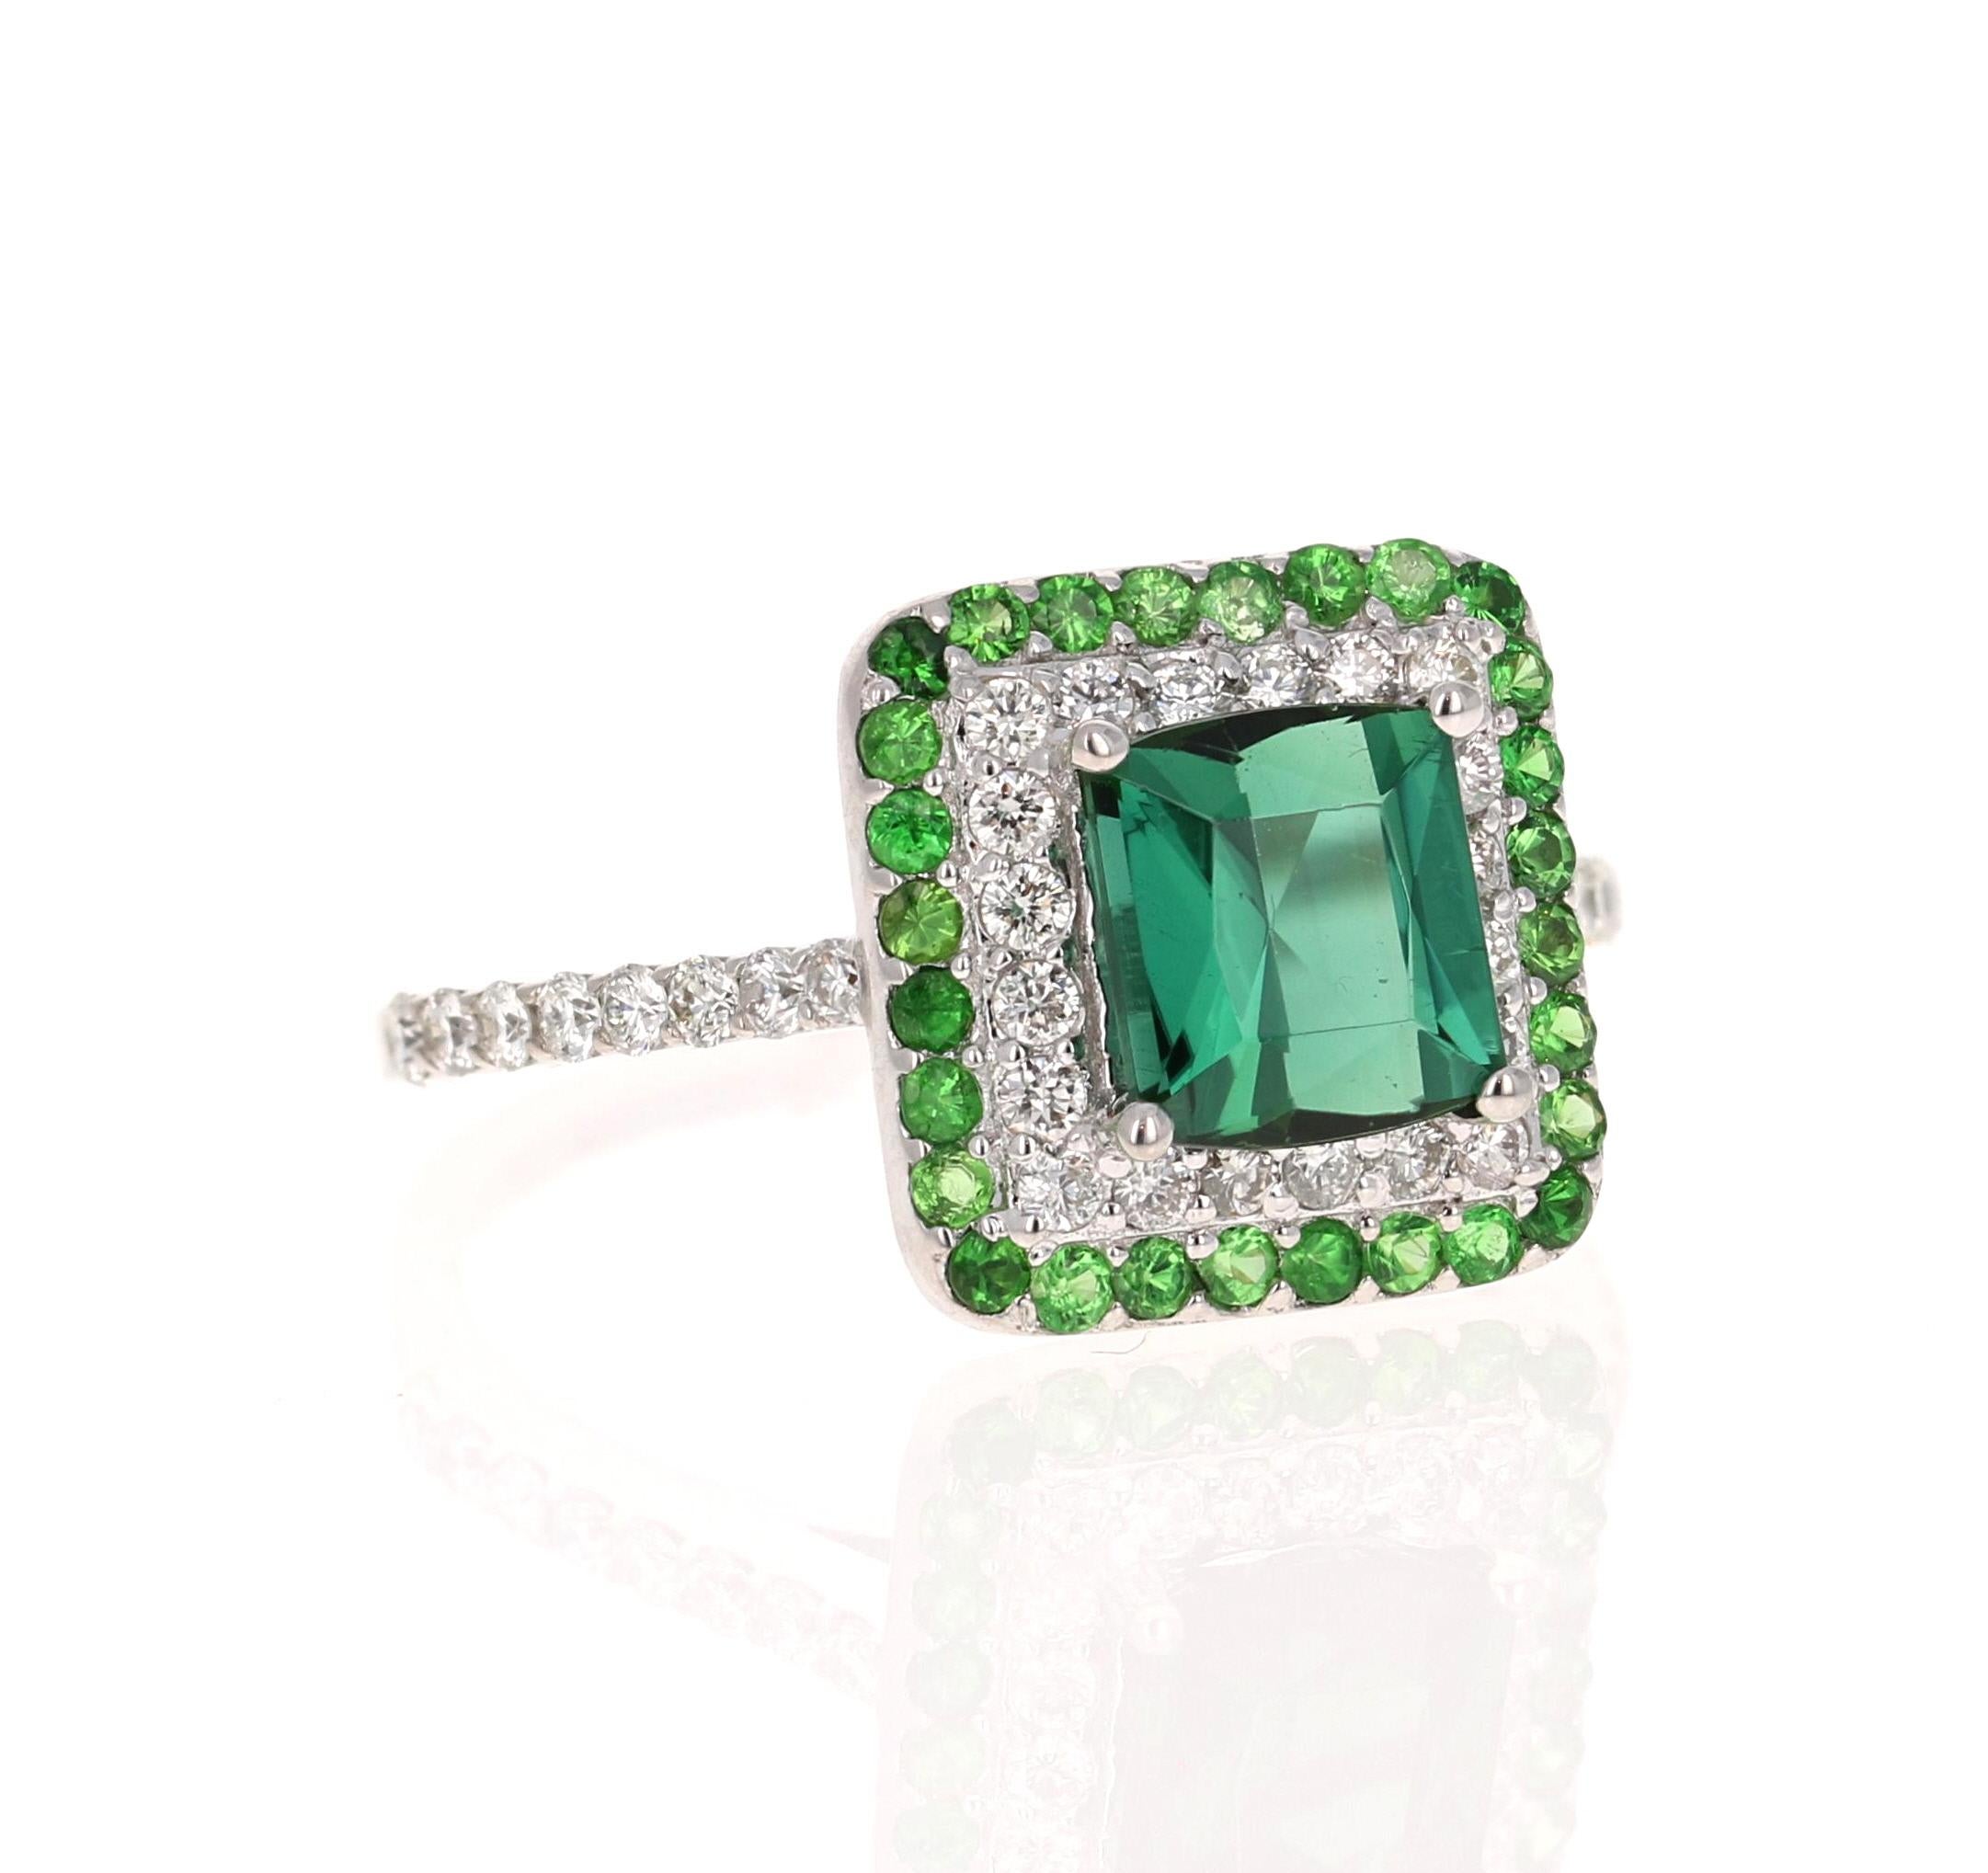 This ring has a beautiful Square Cut Green Tourmaline that weighs 1.58 Carats and has 28 Round Cut Diamonds weighing 0.47 Carats with a Clarity and Color of VS2-H. It is further embellished with 28 Tsavorites that weigh 0.43 Carats. 
The total carat